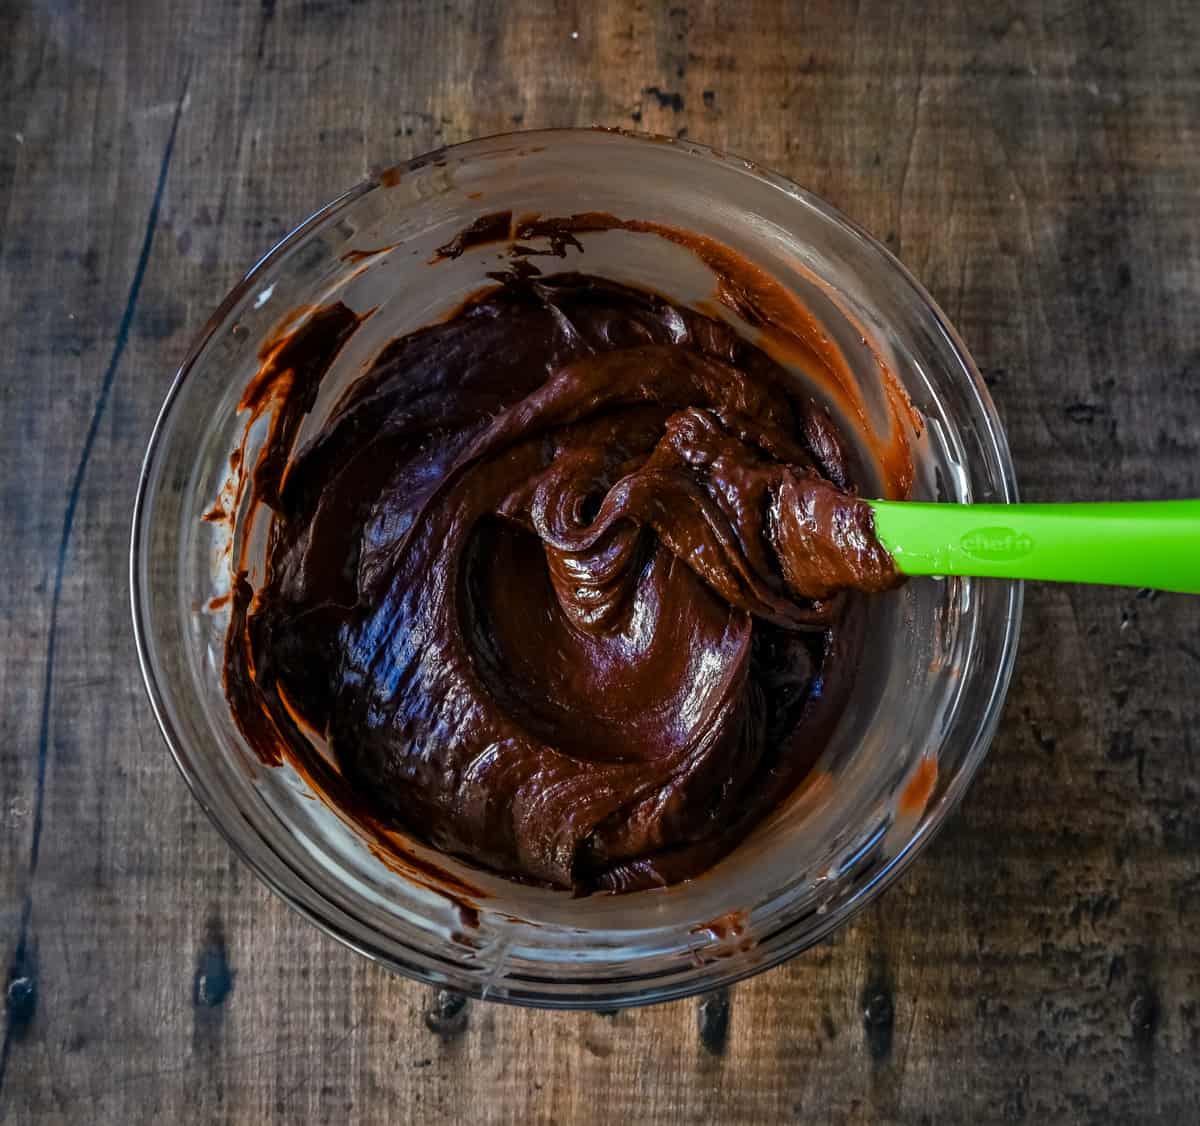 Mixing the chocolate and sweetened condensed milk in a microwave safe bowl